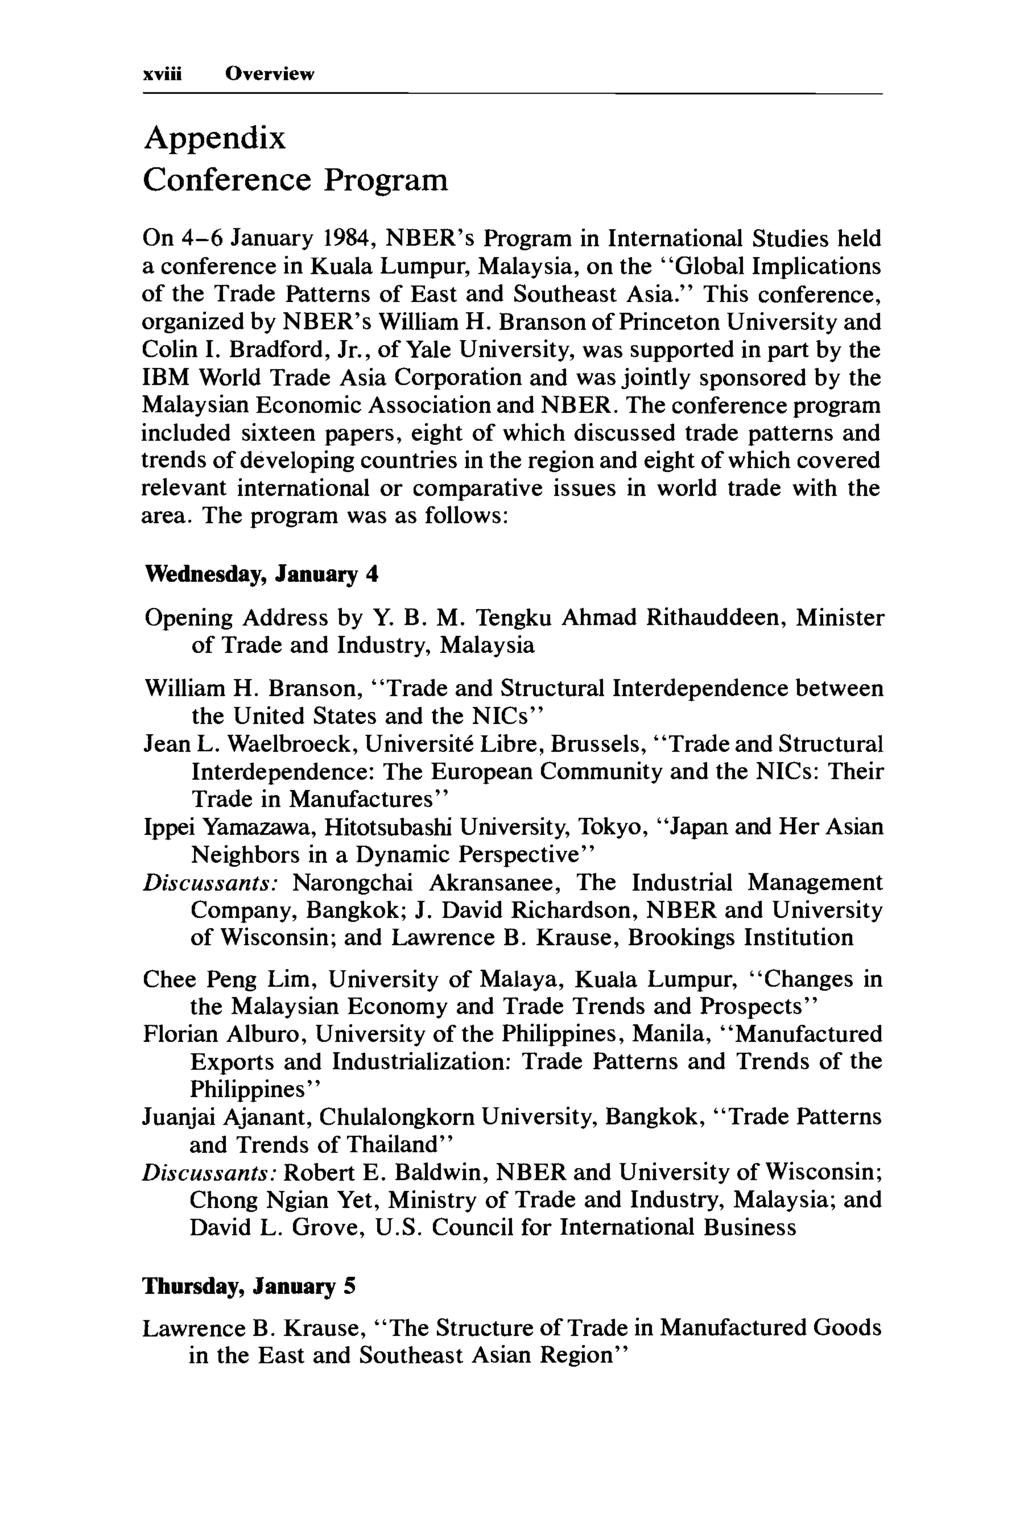 xviii Overview Appendix Conference Program On 4-6 January 1984, NBER s Program in International Studies held a conference in Kuala Lumpur, Malaysia, on the Global Implications of the Trade Patterns